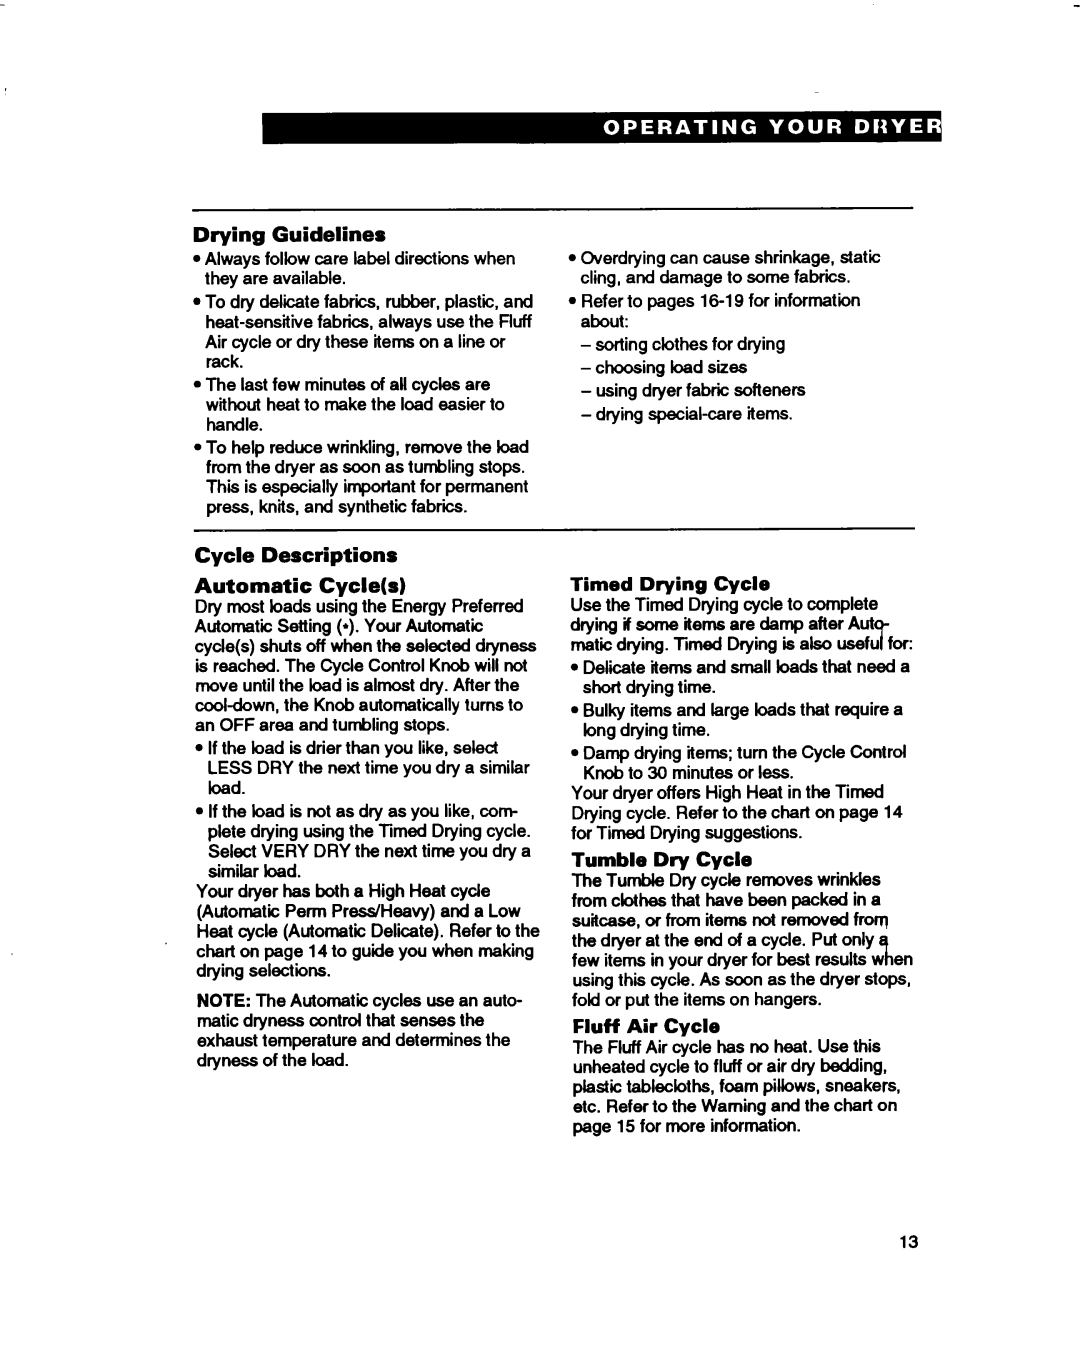 Whirlpool 3396314 warranty Drying Guidelines, Cycle Descriptions Automatic Cycles, Timed Drying Cycle, Tumble Dry Cycle 